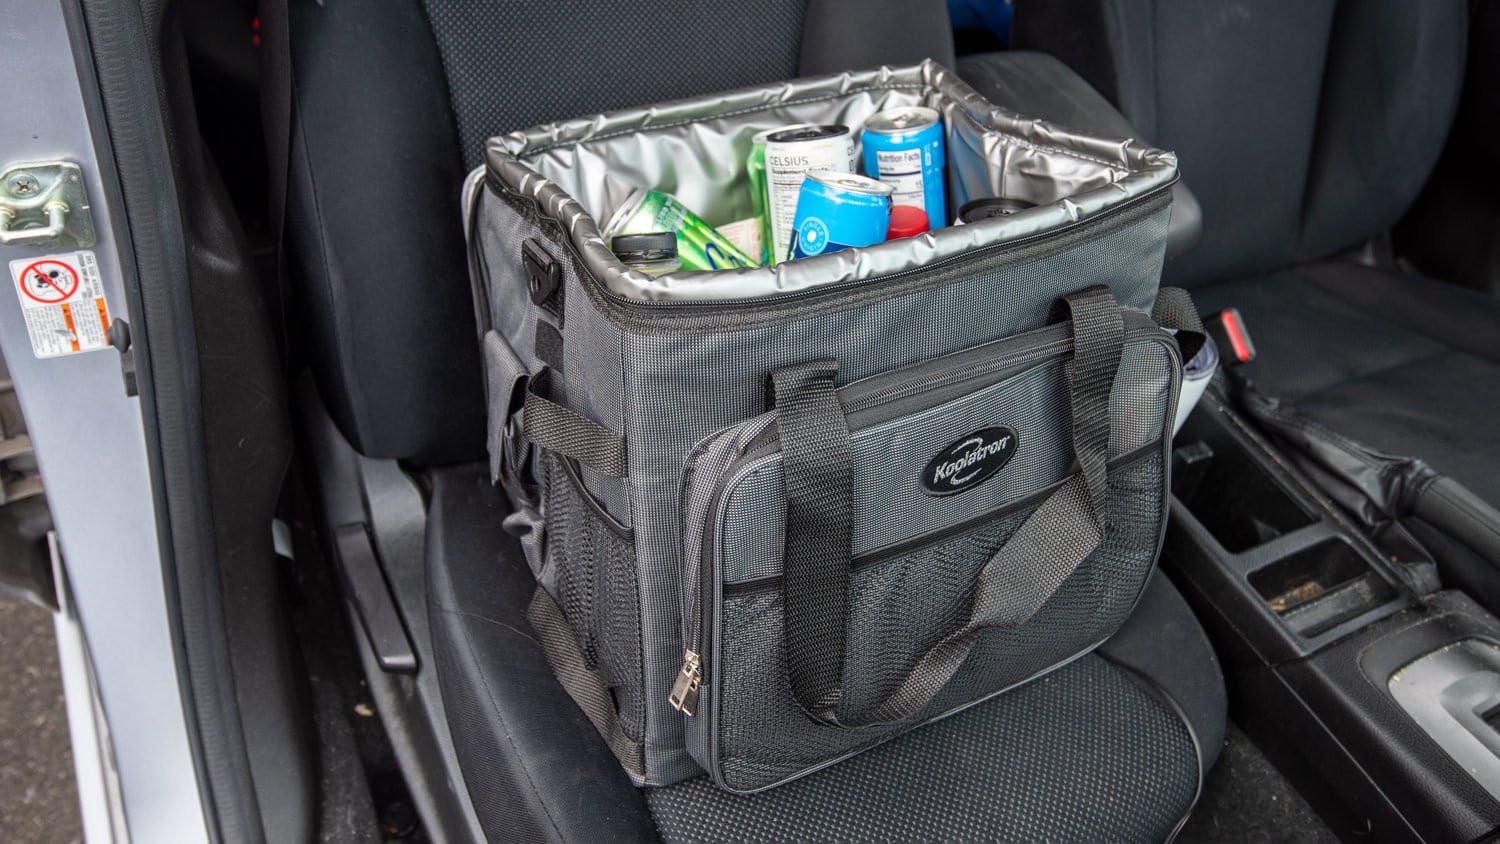 A Koolatron D25 sits on the seat of a car, filled with assorted beverage cans